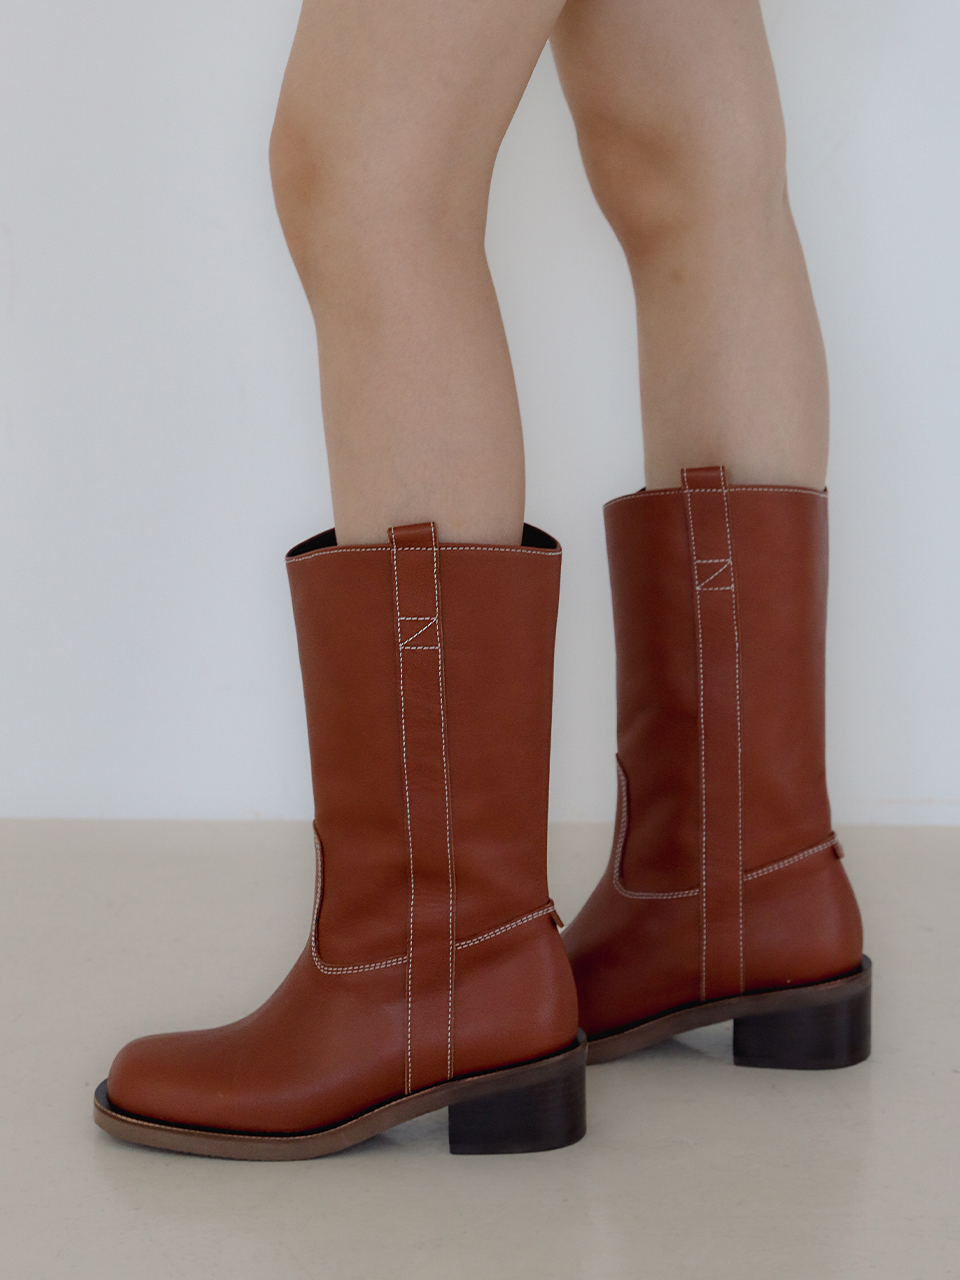 Mod middle boots_23529_brown